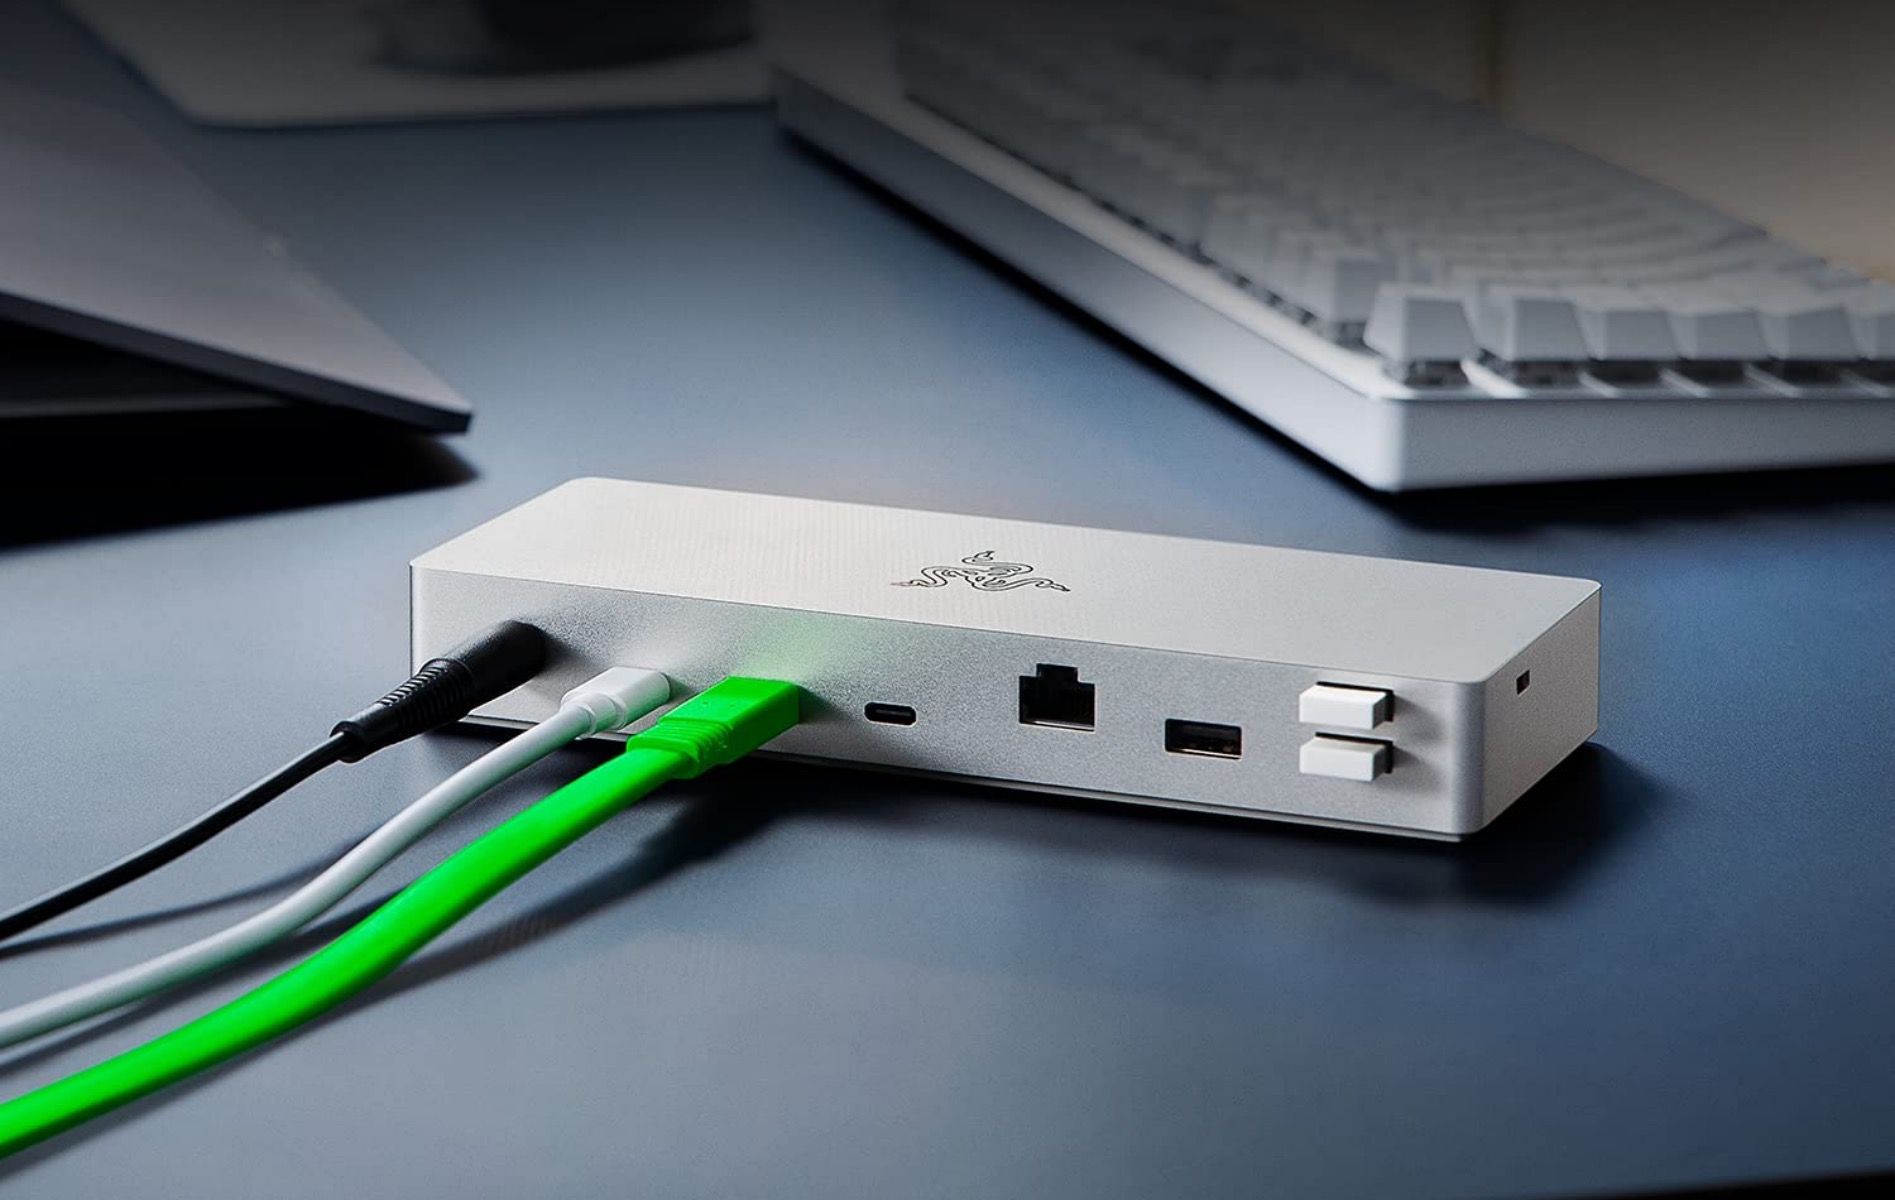 Razer Thunderbolt 4 dock for Mac with charging cabled connected sitting on a desk beside a keyboard